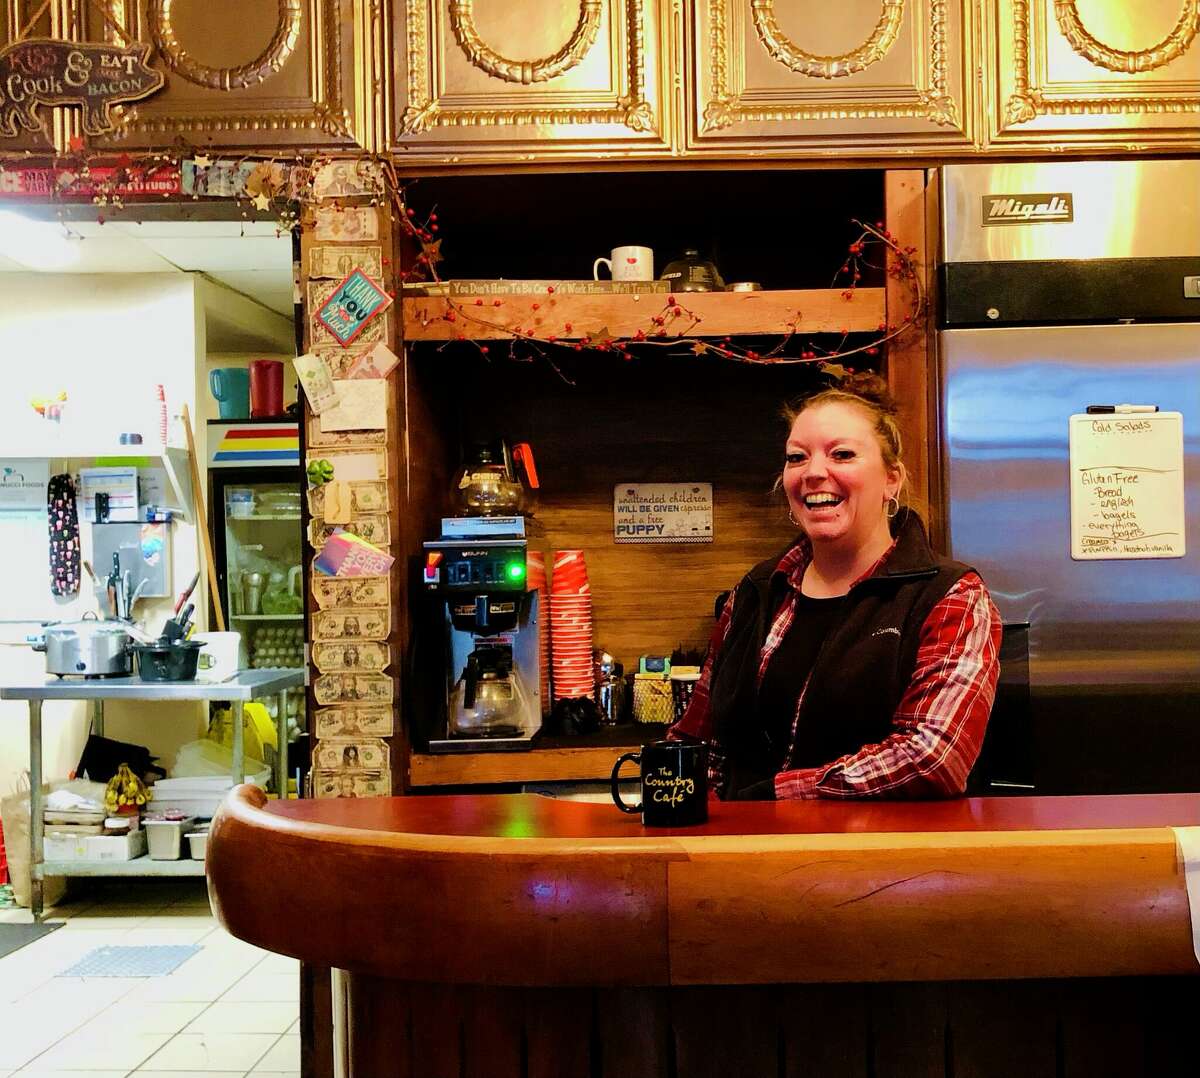  Lexi Ryder poses in her Country Cafe' restaurant on Main Street in Schoharie before hosting dinner for the local Kiwanis Club.